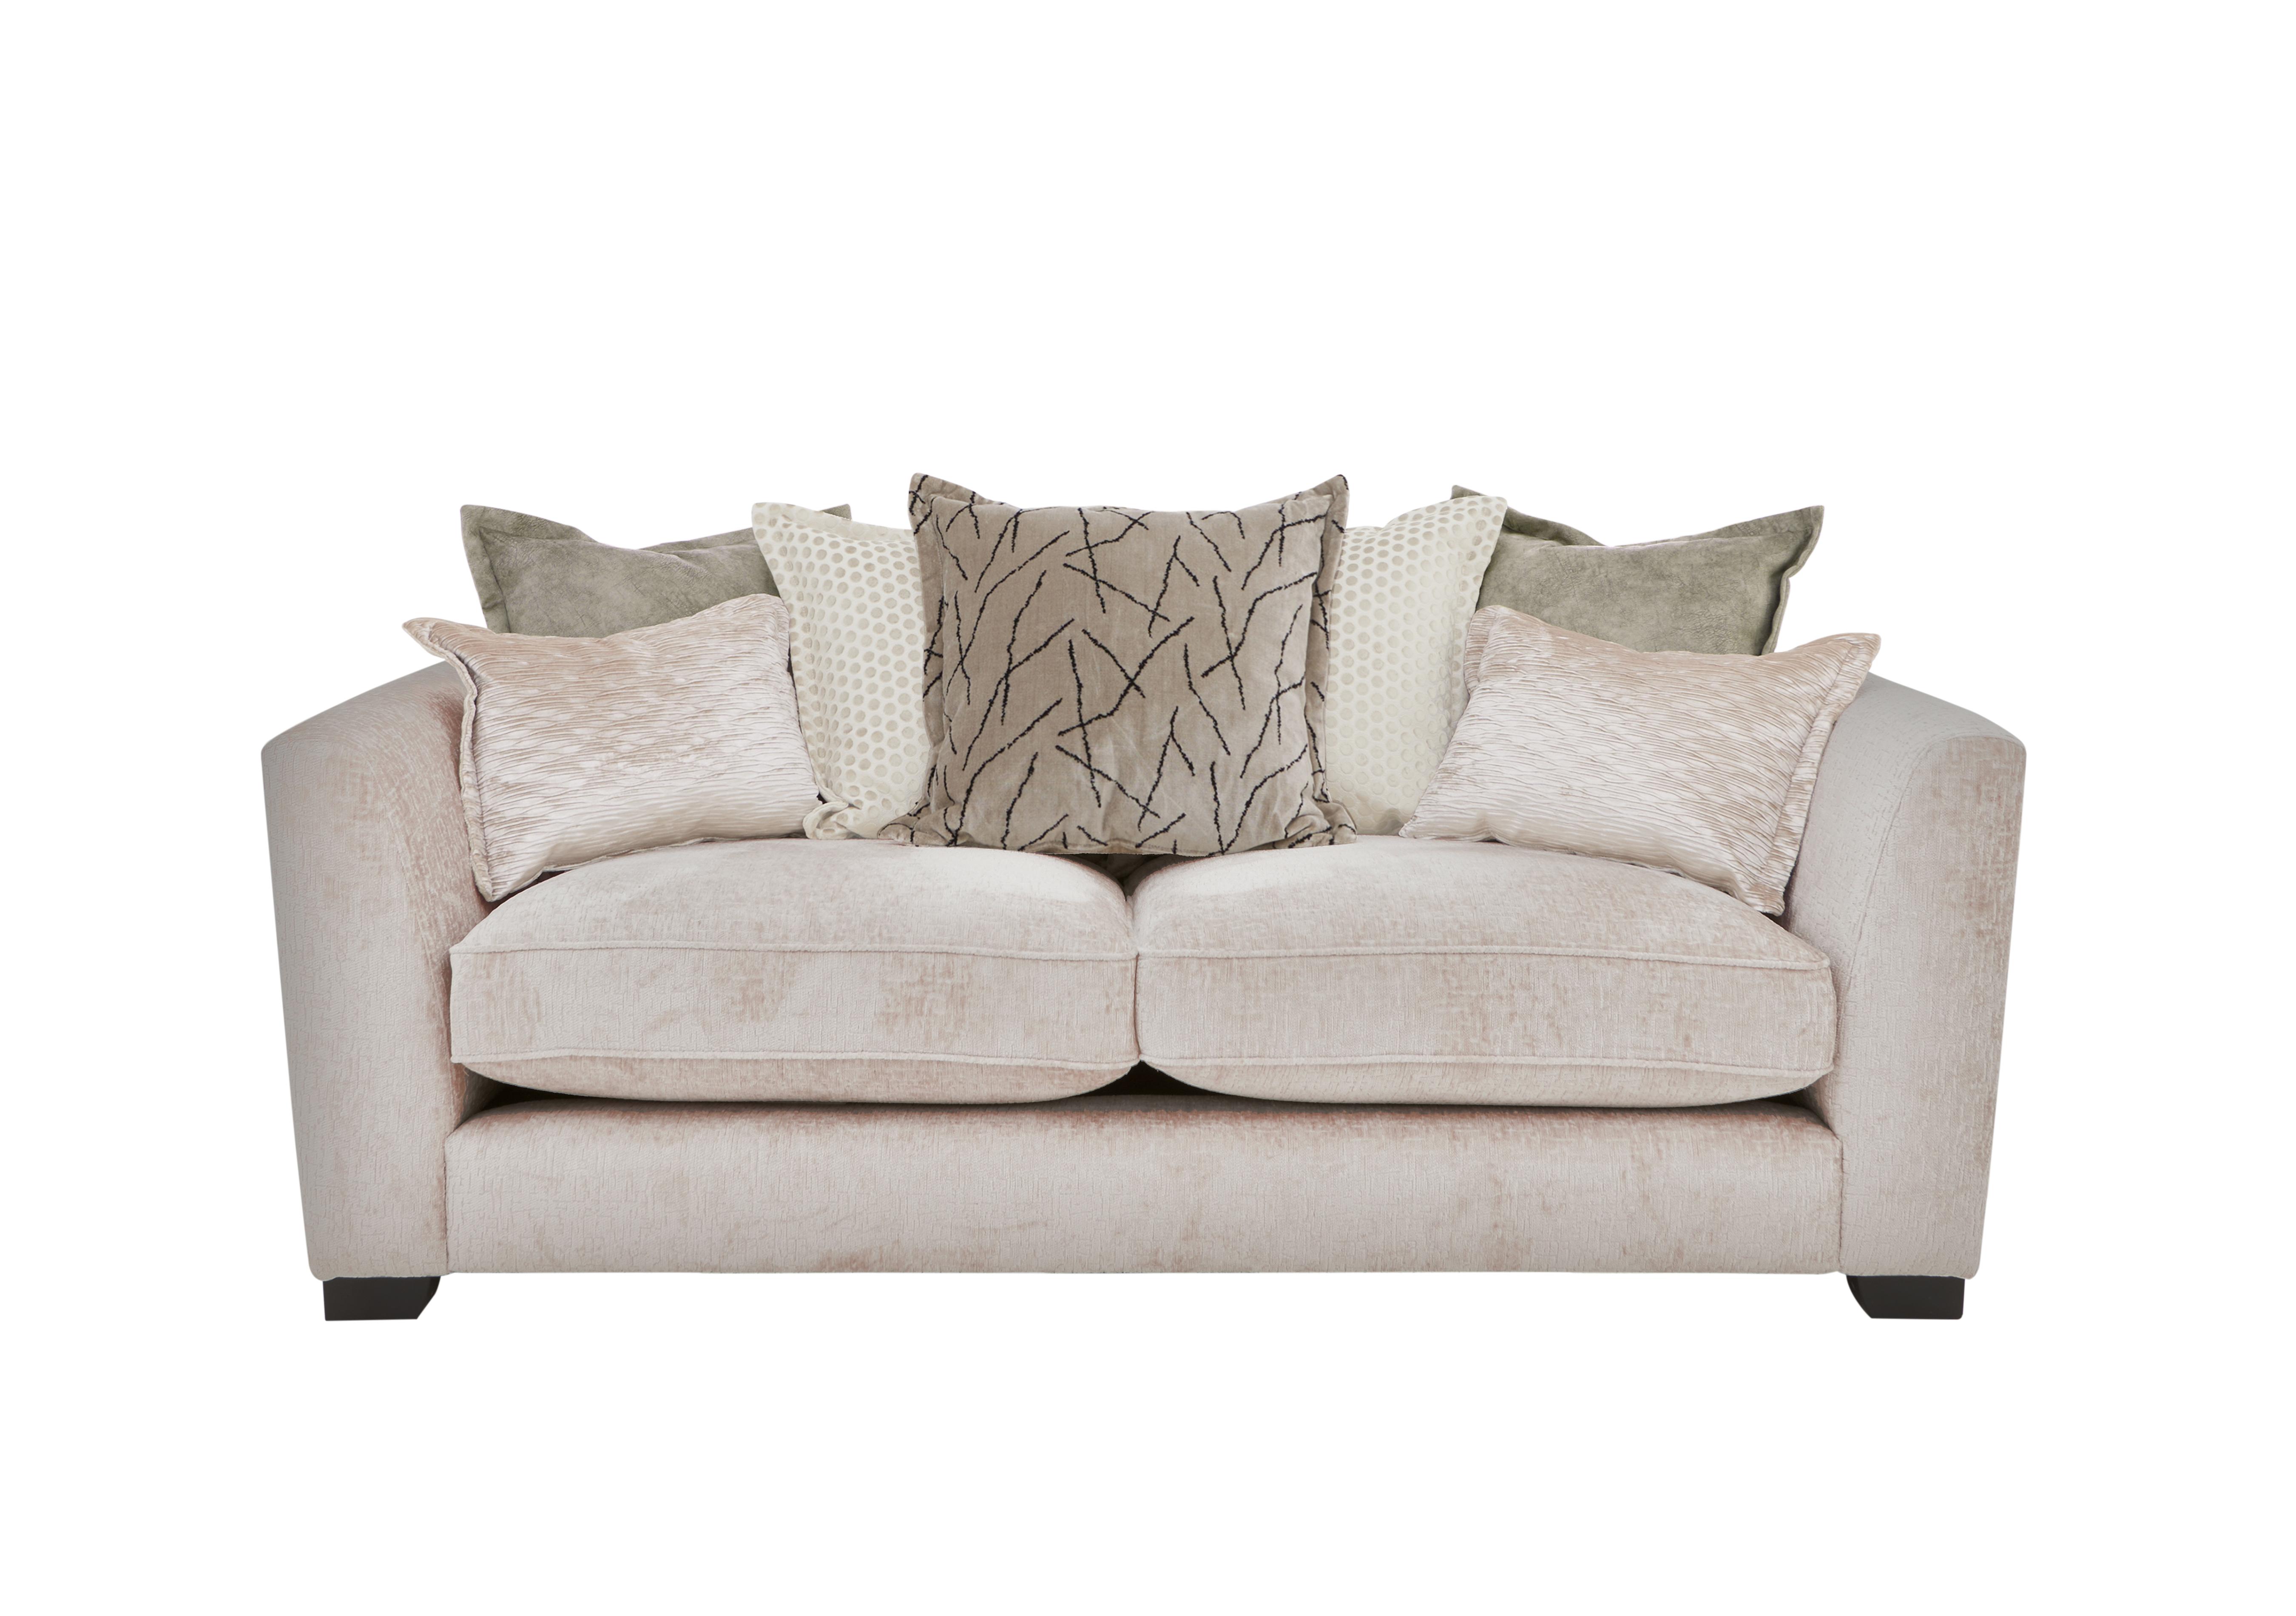 Boutique Lavish Fabric 3 Seater Scatter Back Sofa in Alexandra Natural on Furniture Village